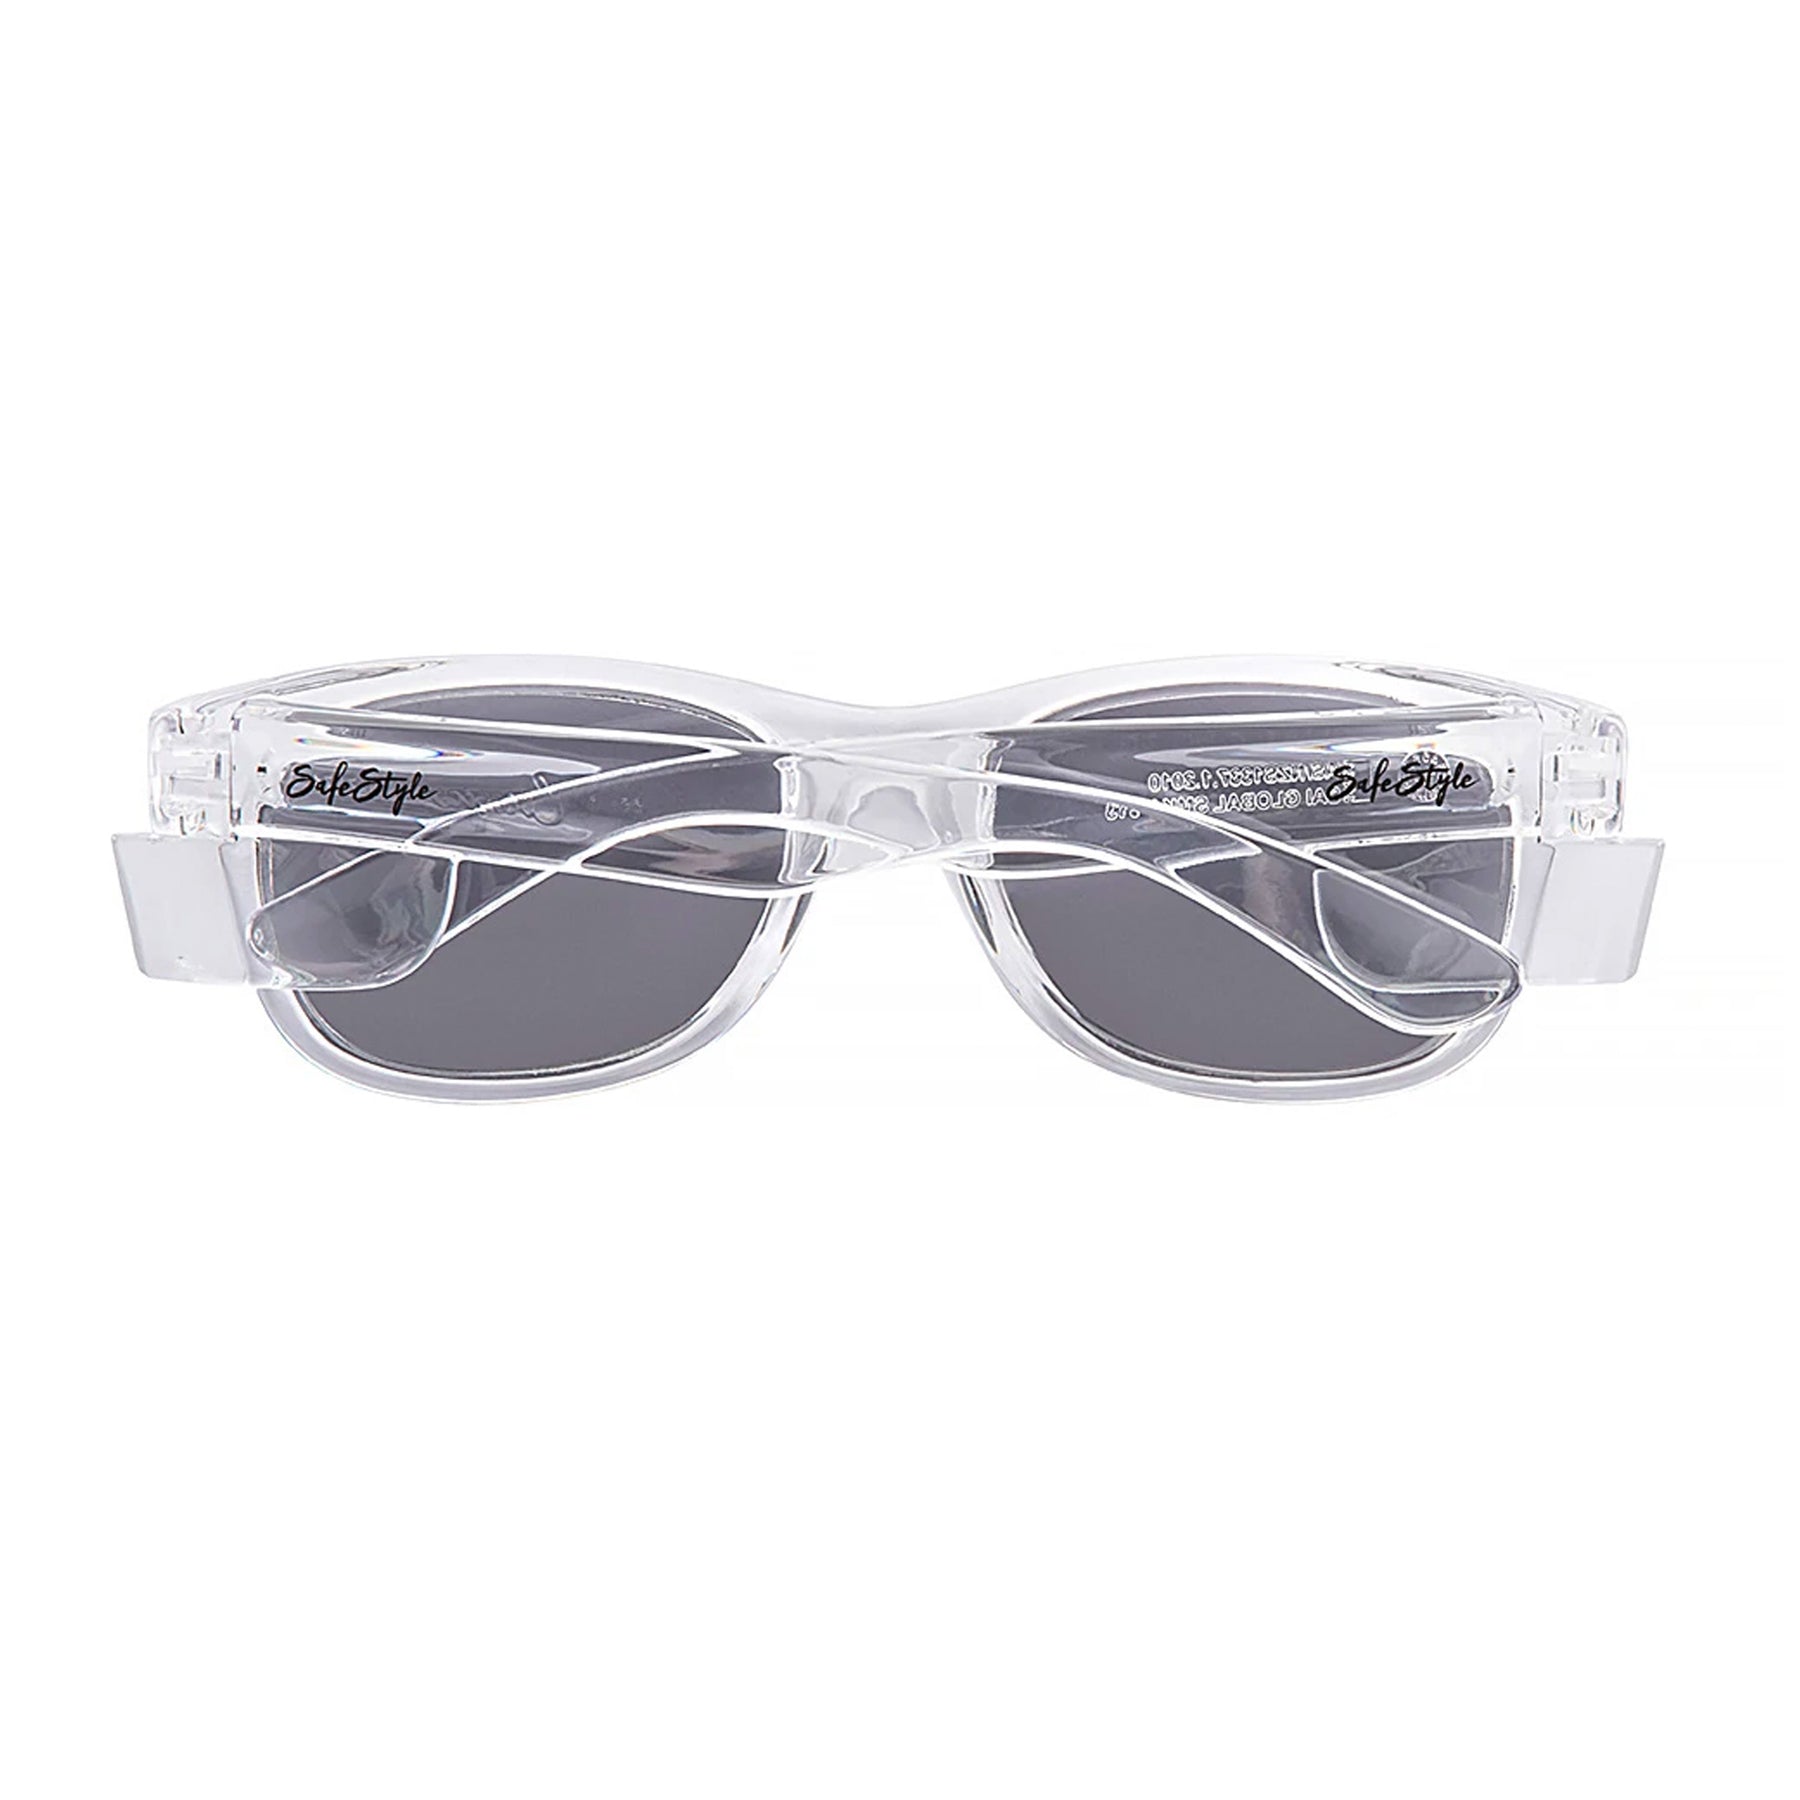 safe style classic clear frame glasses with tinted lens